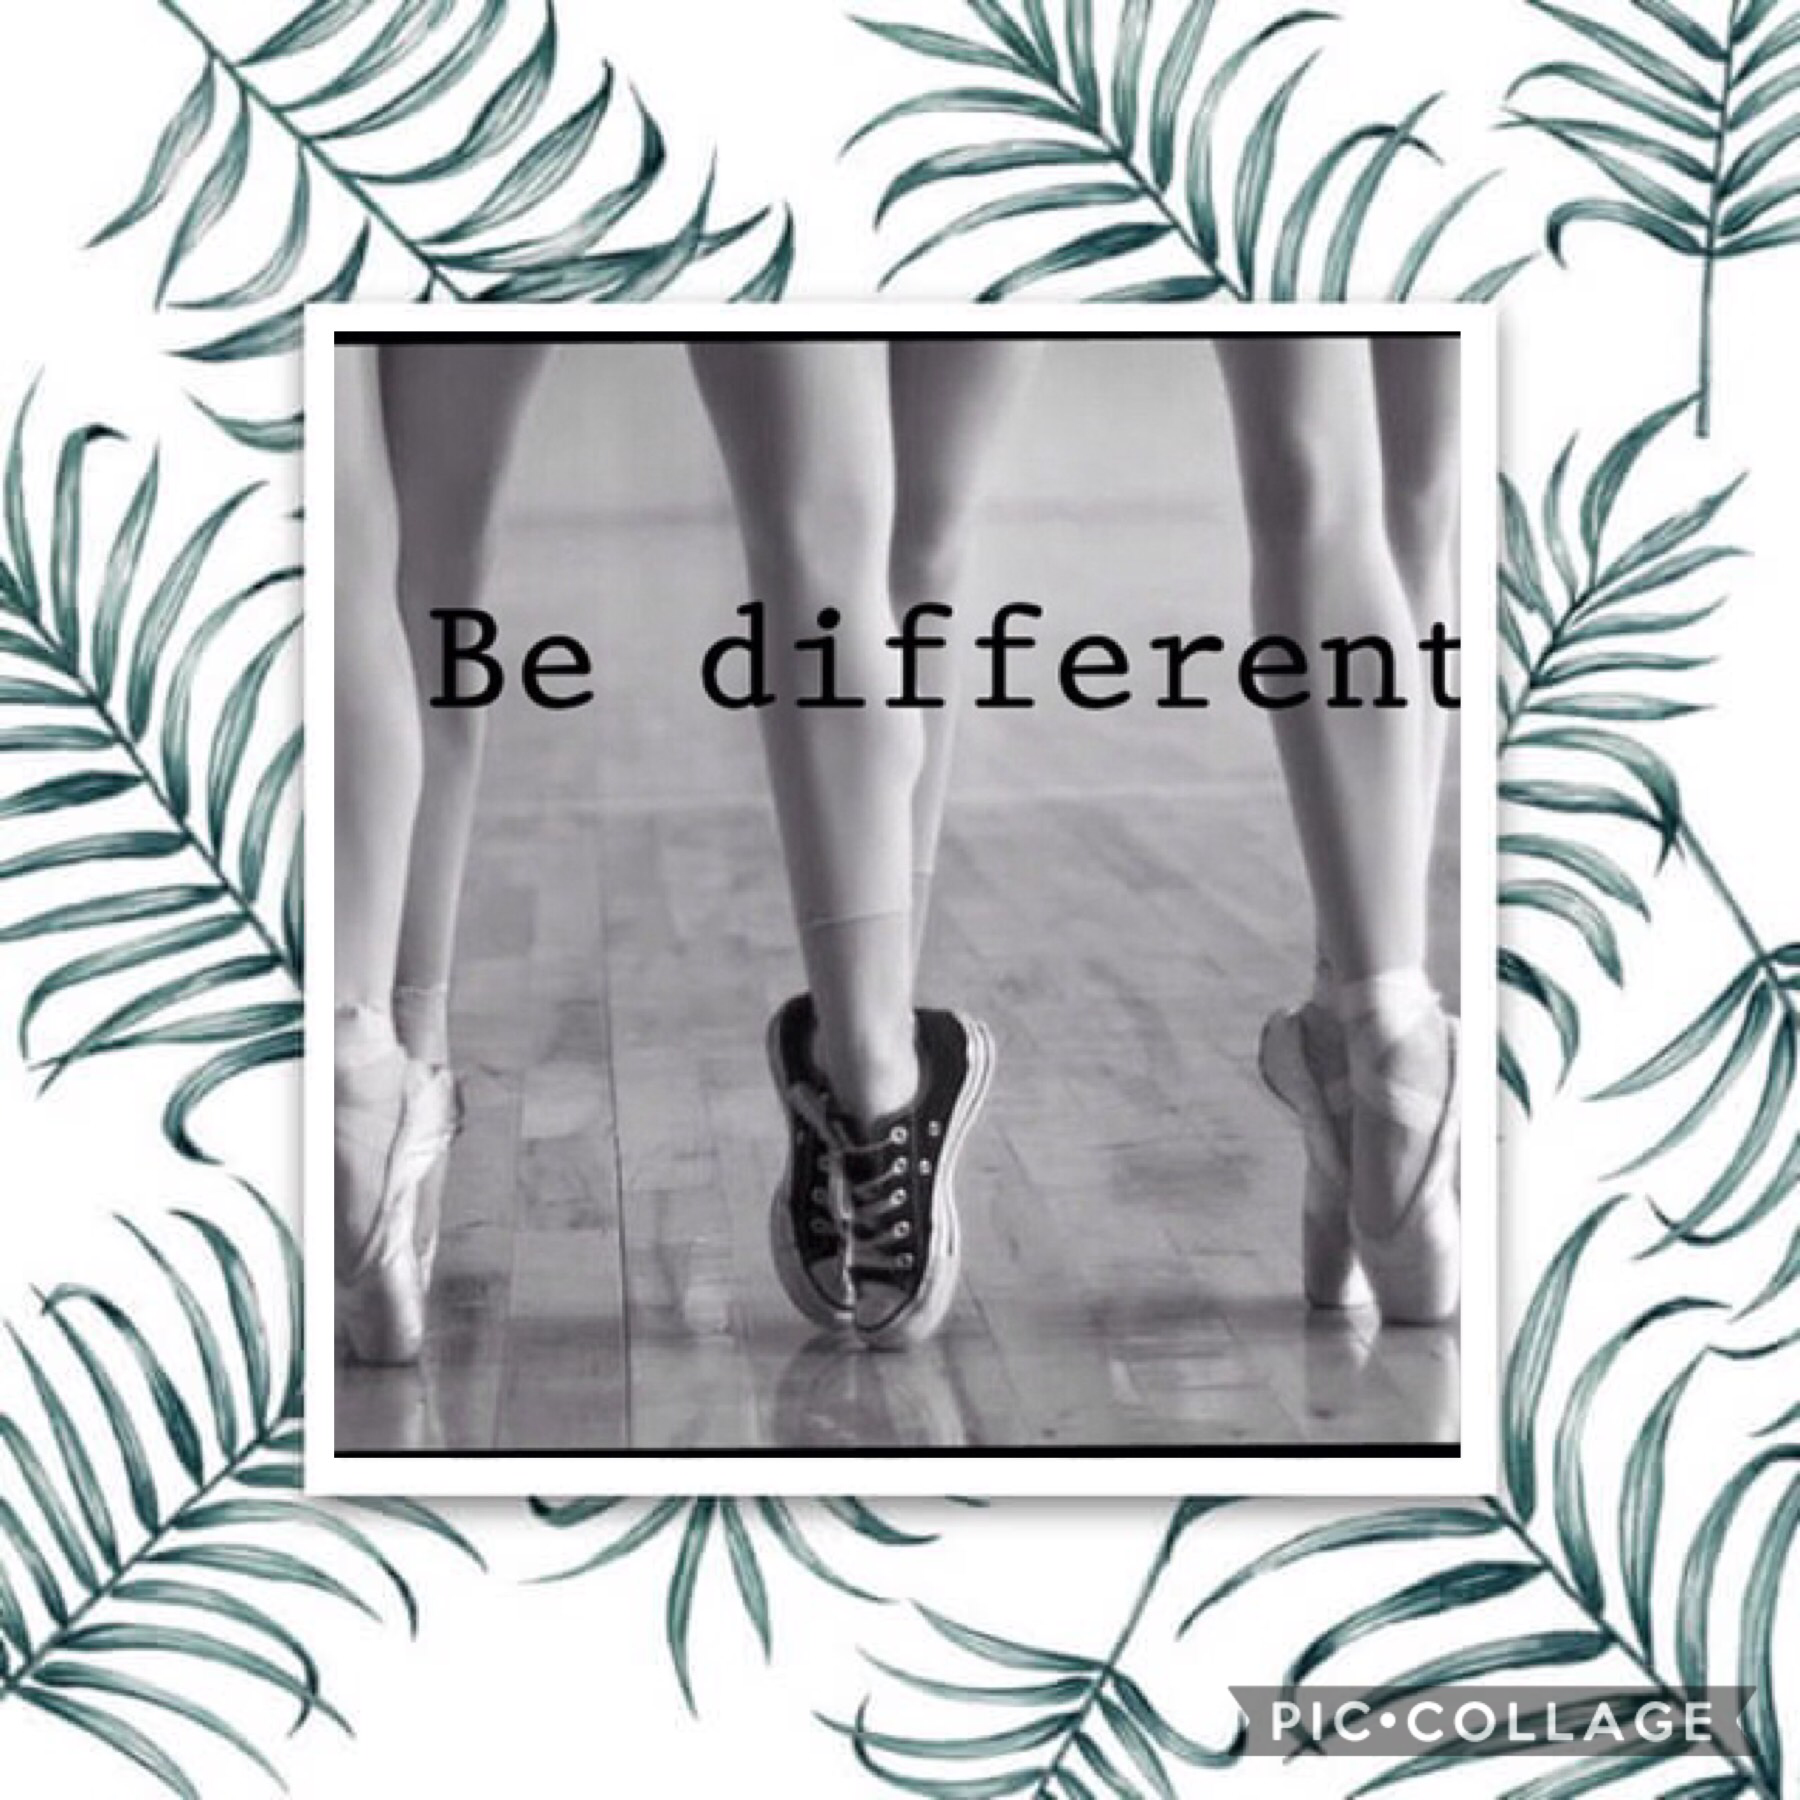 Be different and free 


#loveballet